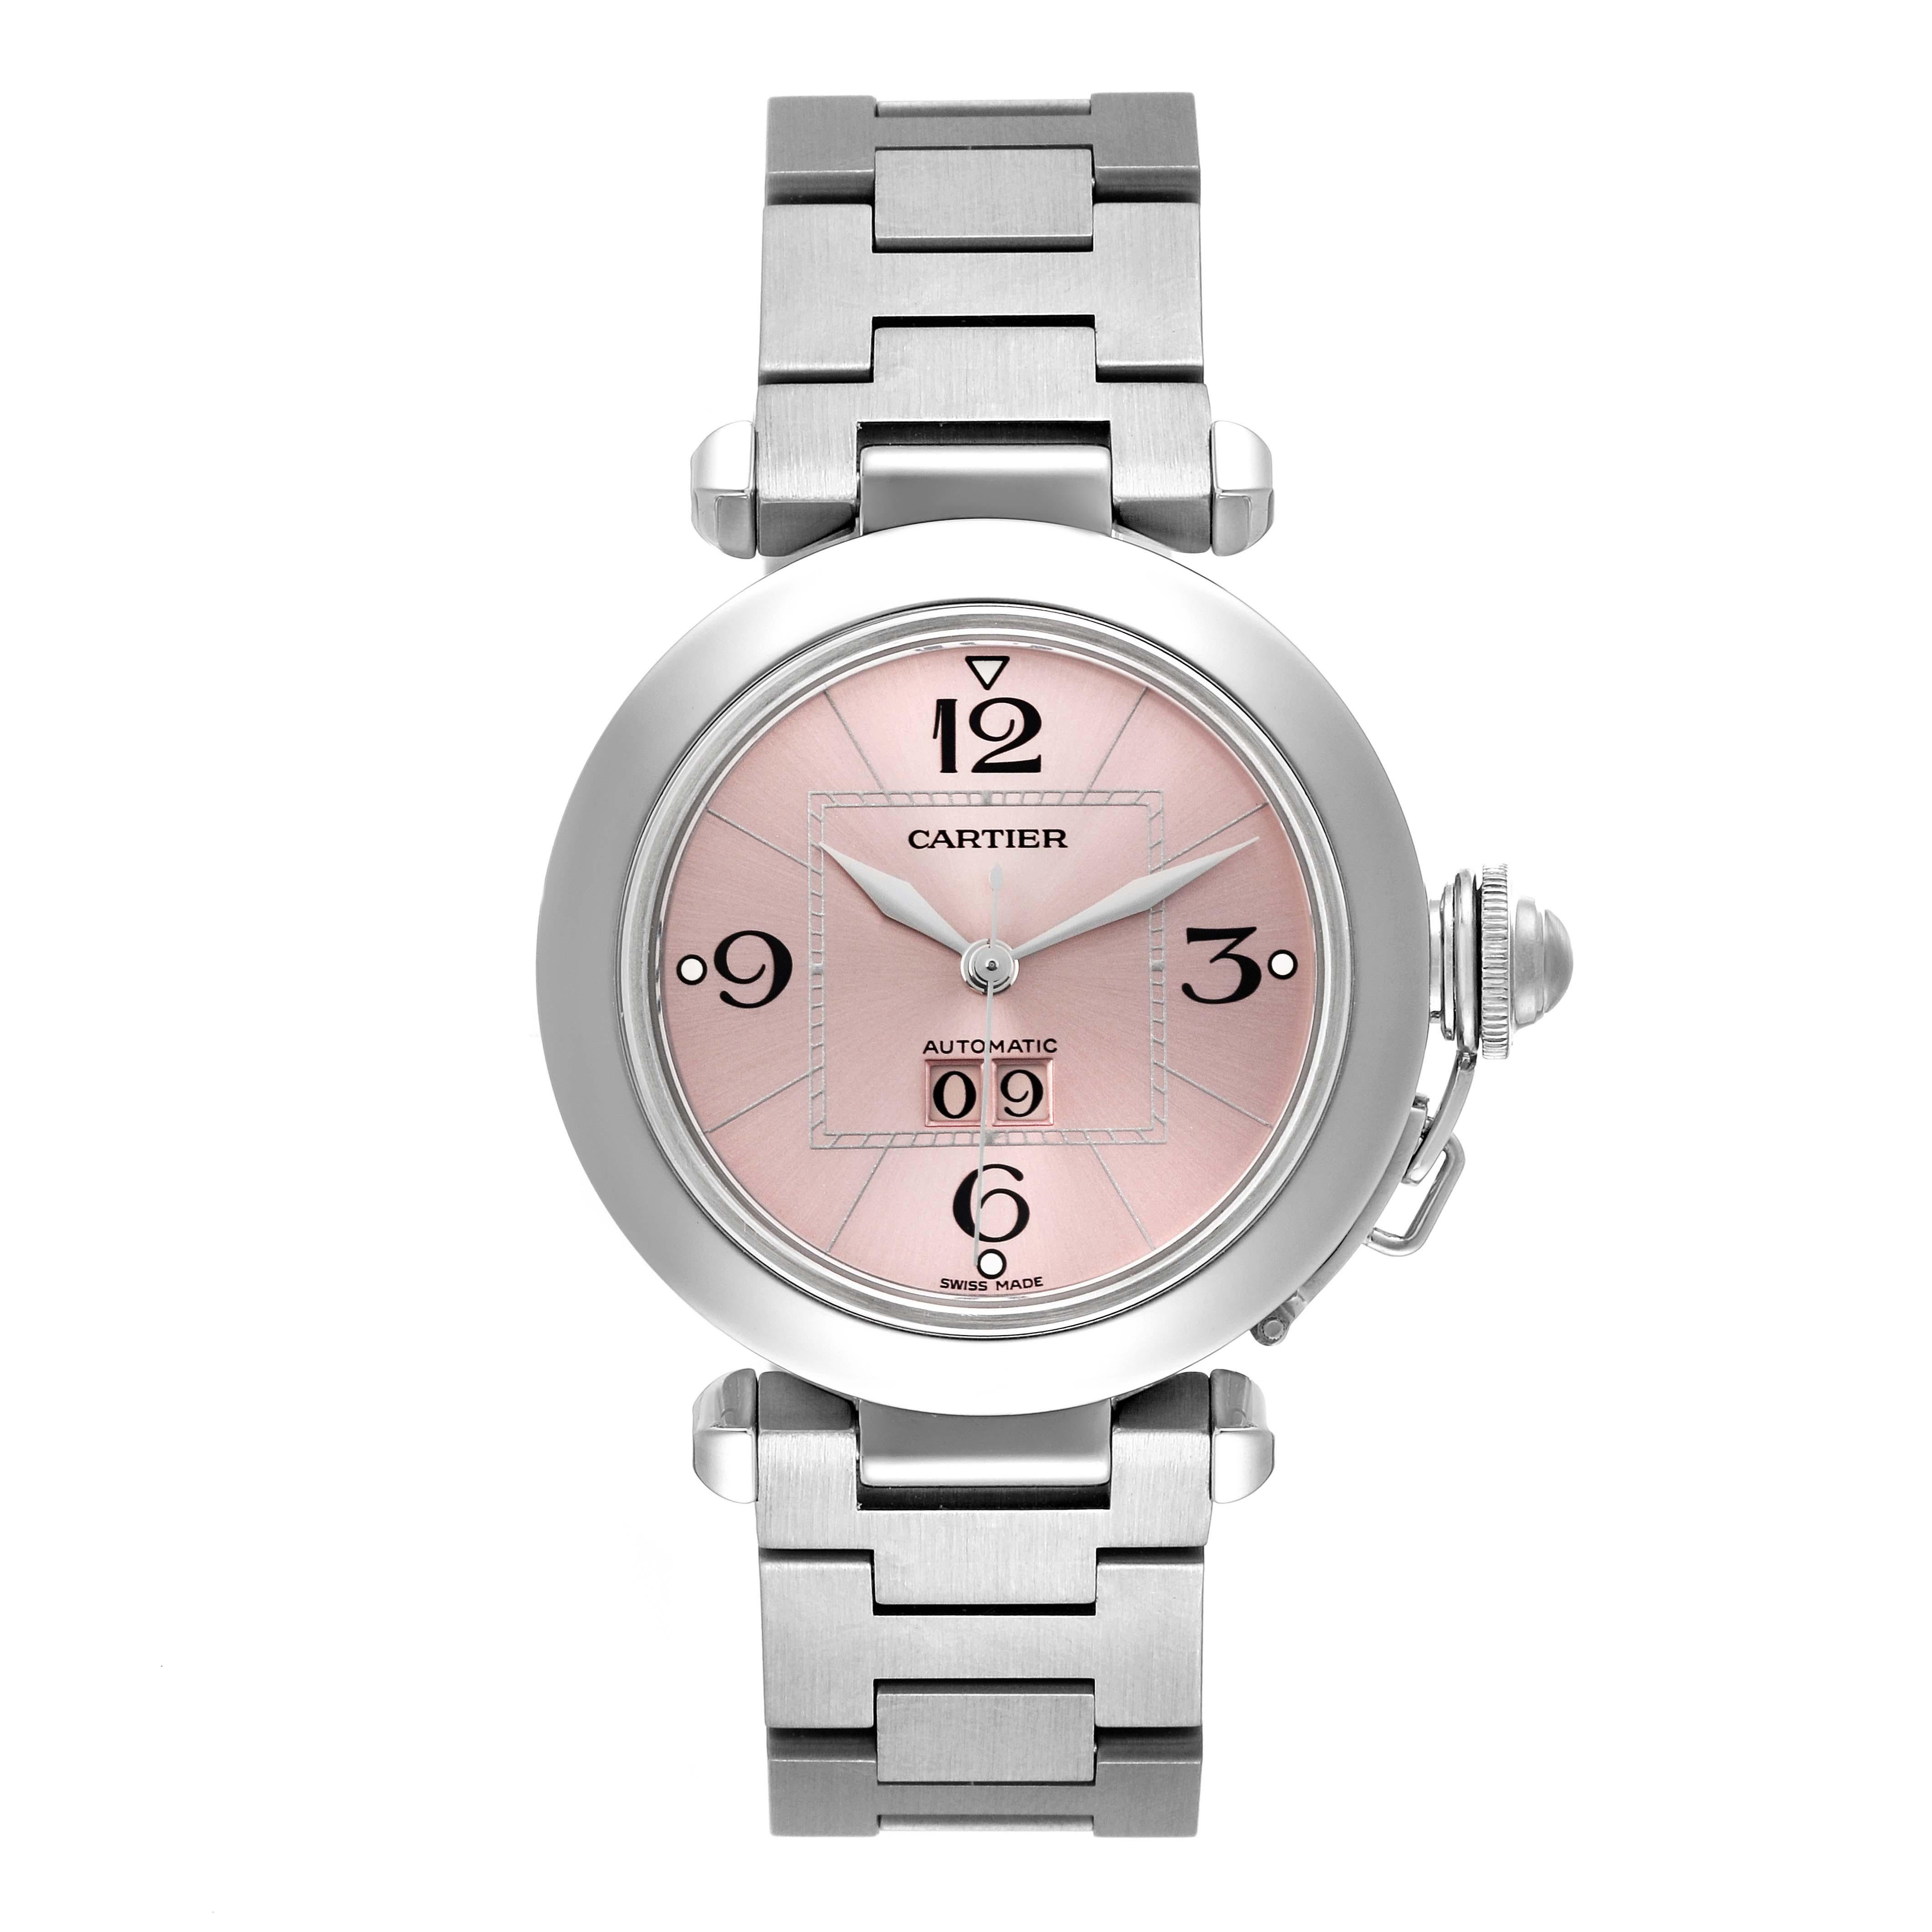 Cartier Pasha Big Date Pink Dial Steel Ladies Watch W31058M7. Automatic self-winding movement. Round stainless steel case 35.0 mm in diameter. Case back with 8 screws. Vendome lugs. Winding-crown protection cap. Stainless steel concave bezel.